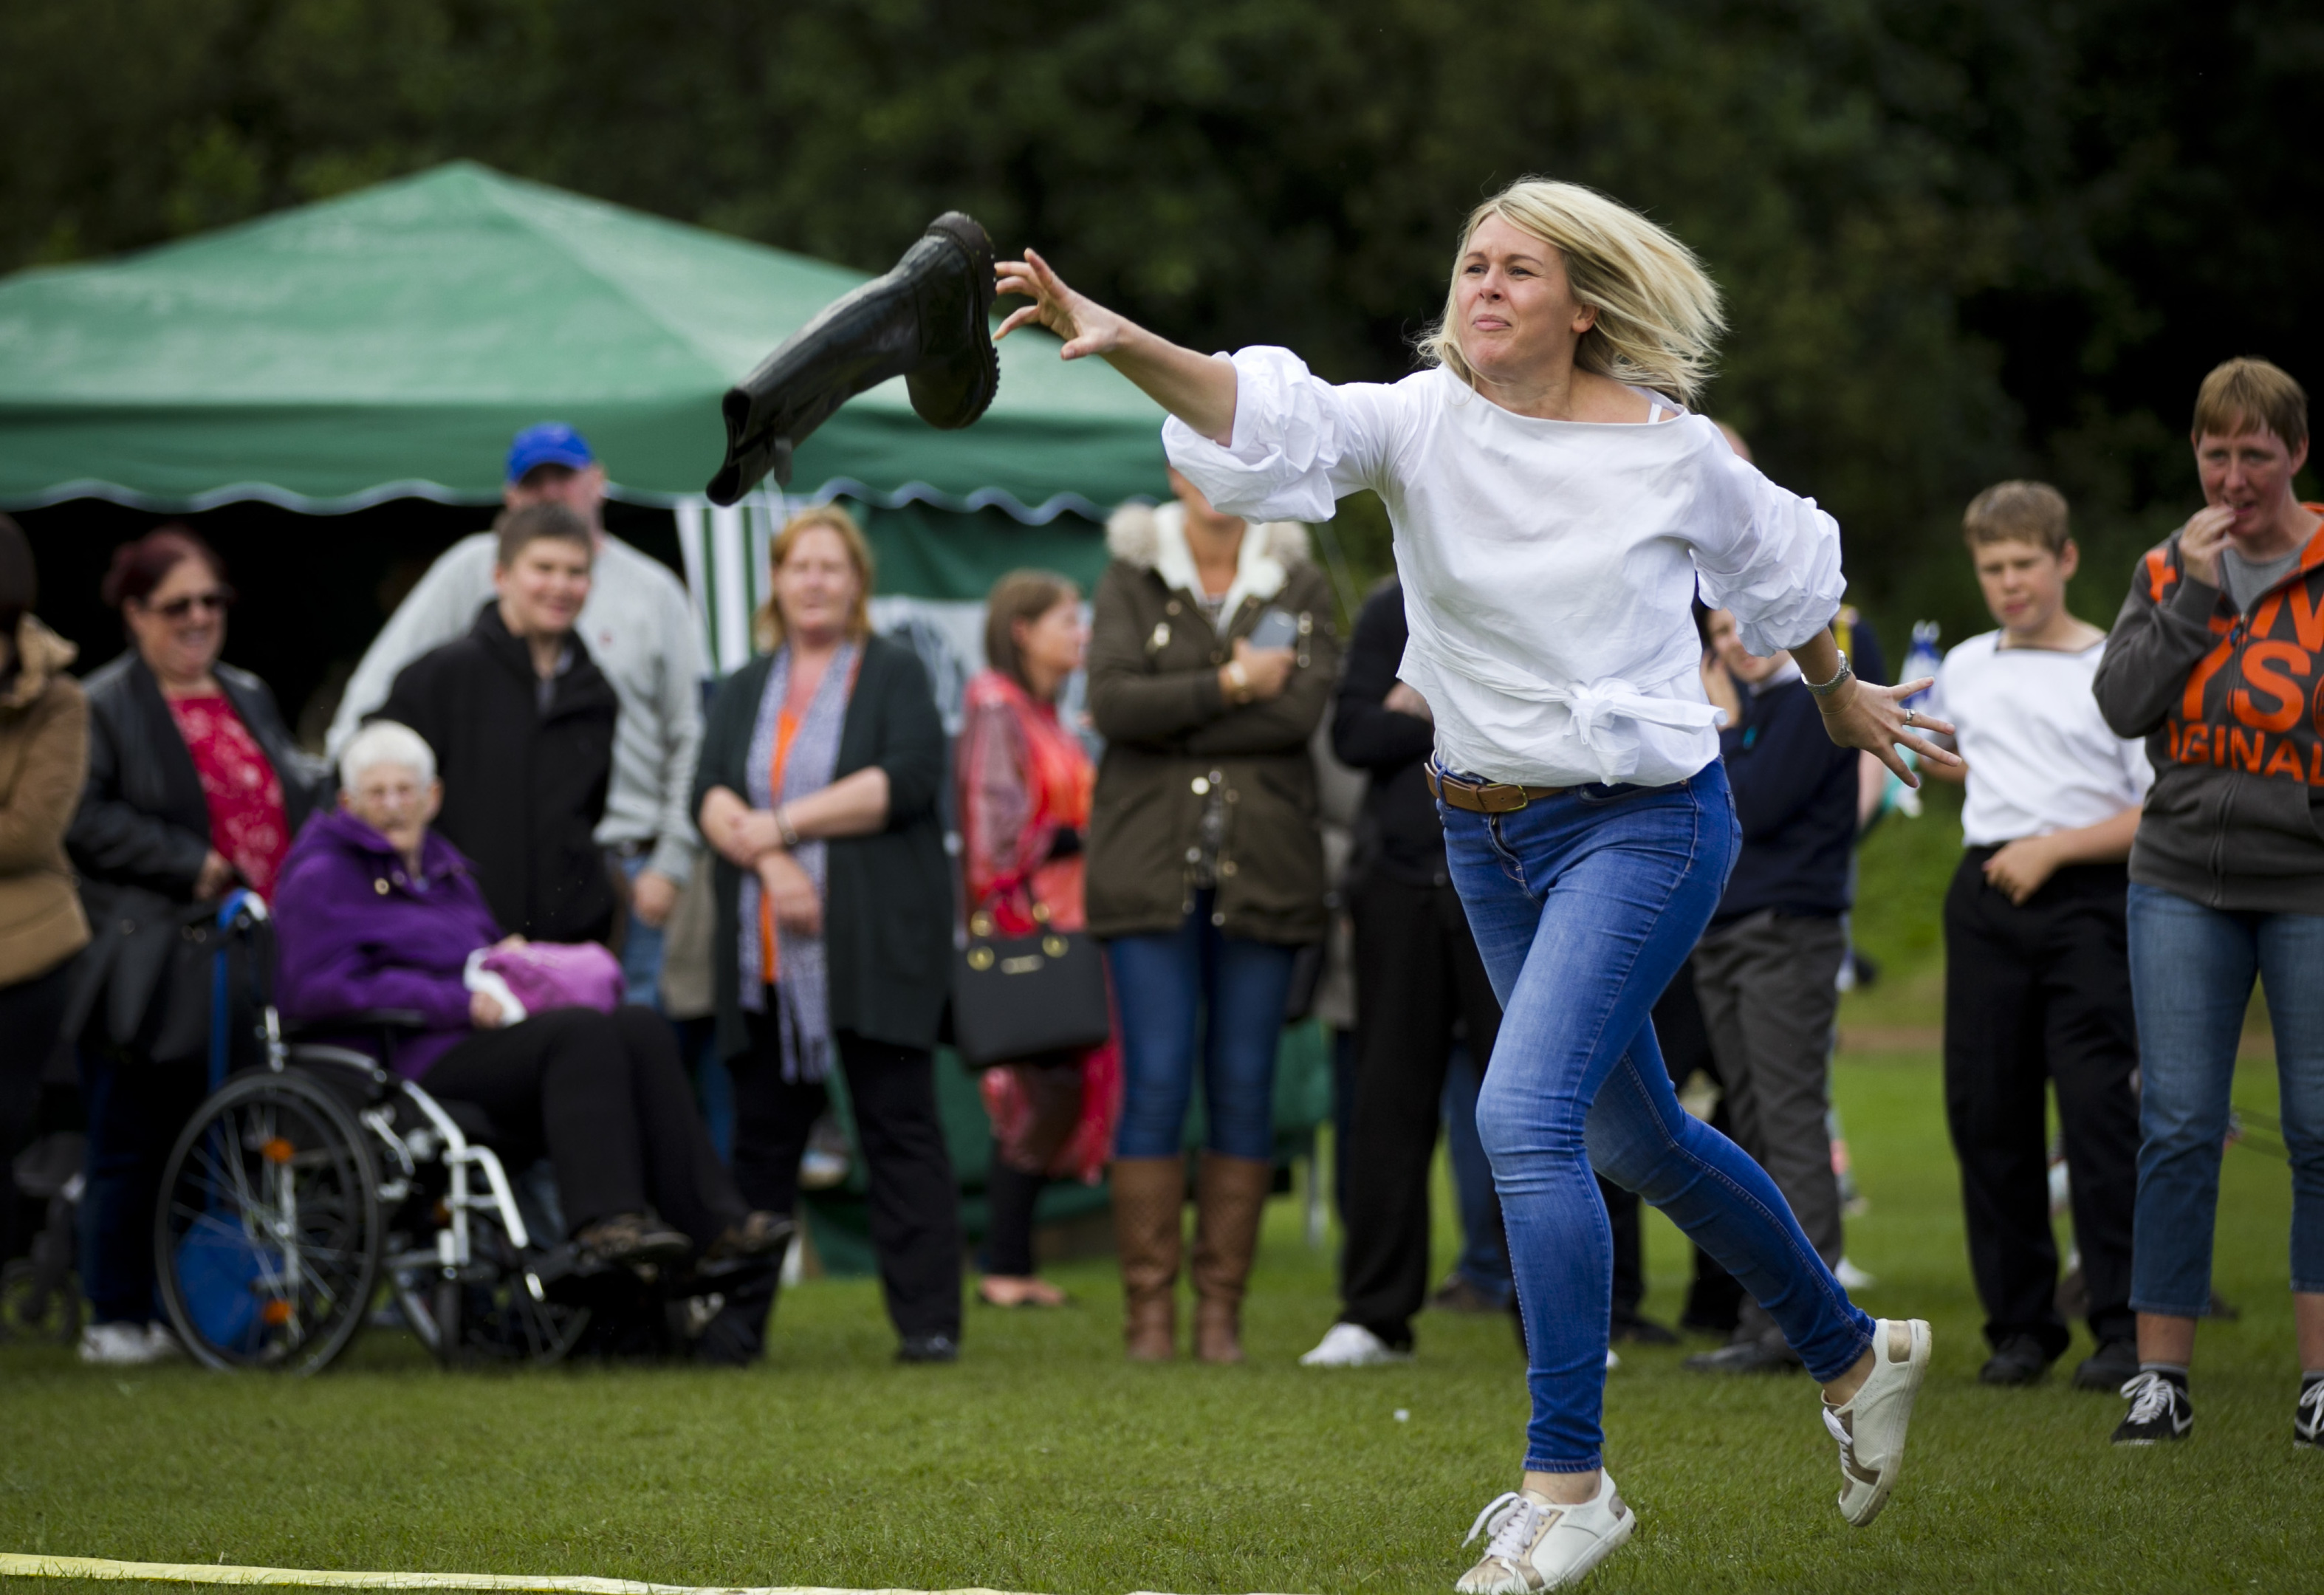 Welly throwing competition at Duncan Stewart Park, Bonnybridge (Andrew Cawley / DC Thomson)